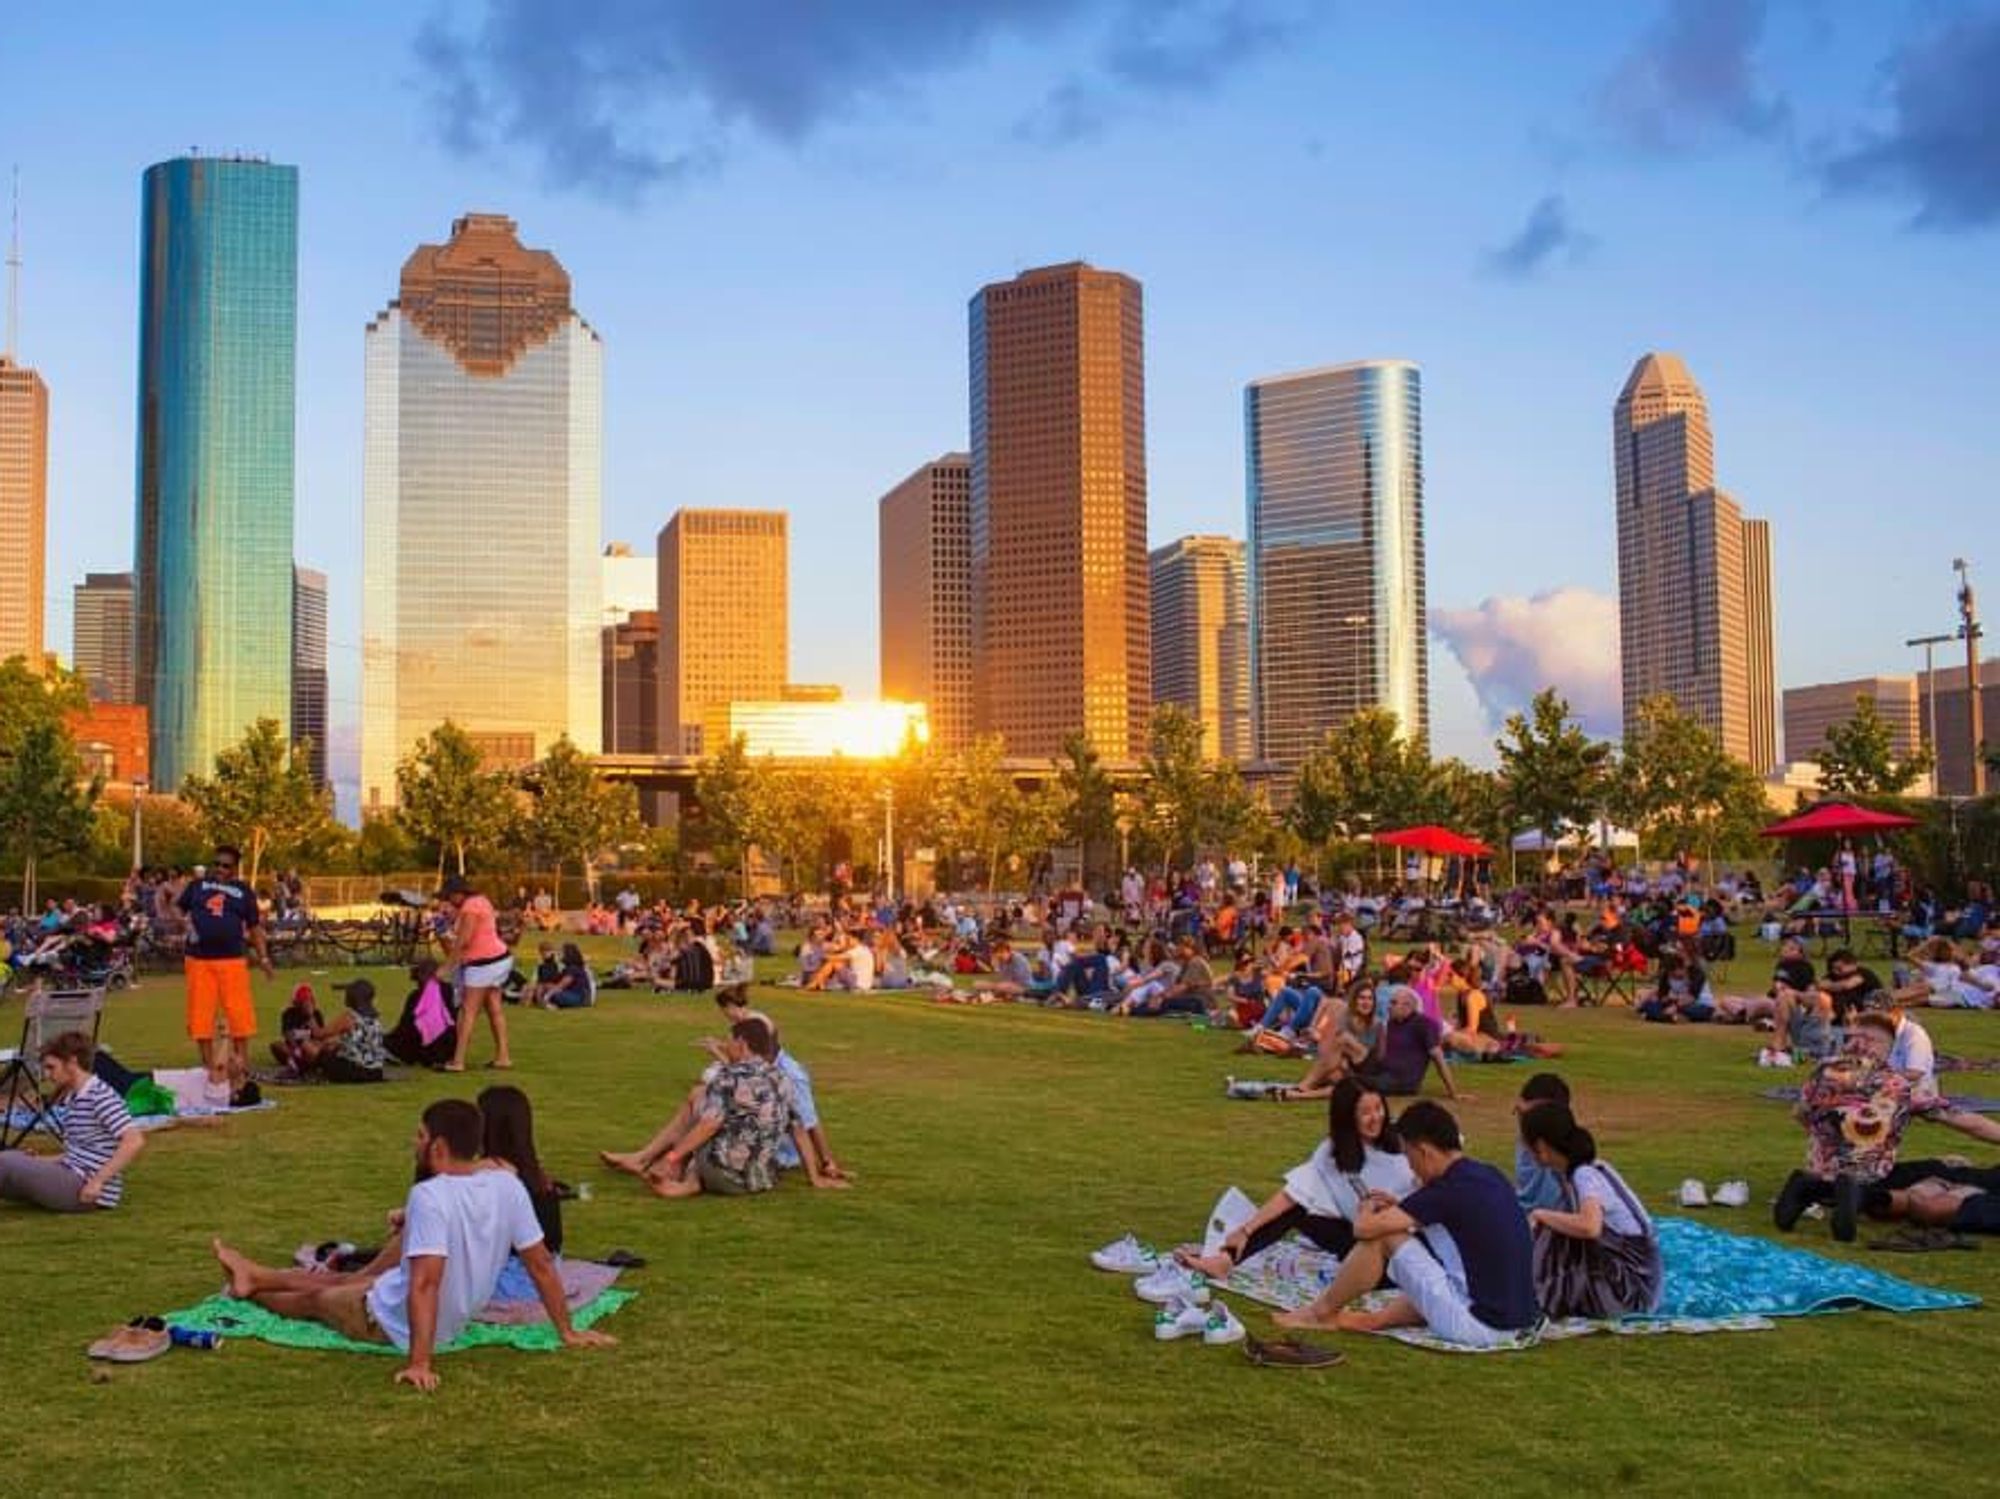 Houston Travel Guide - Vacation & Trip Ideas